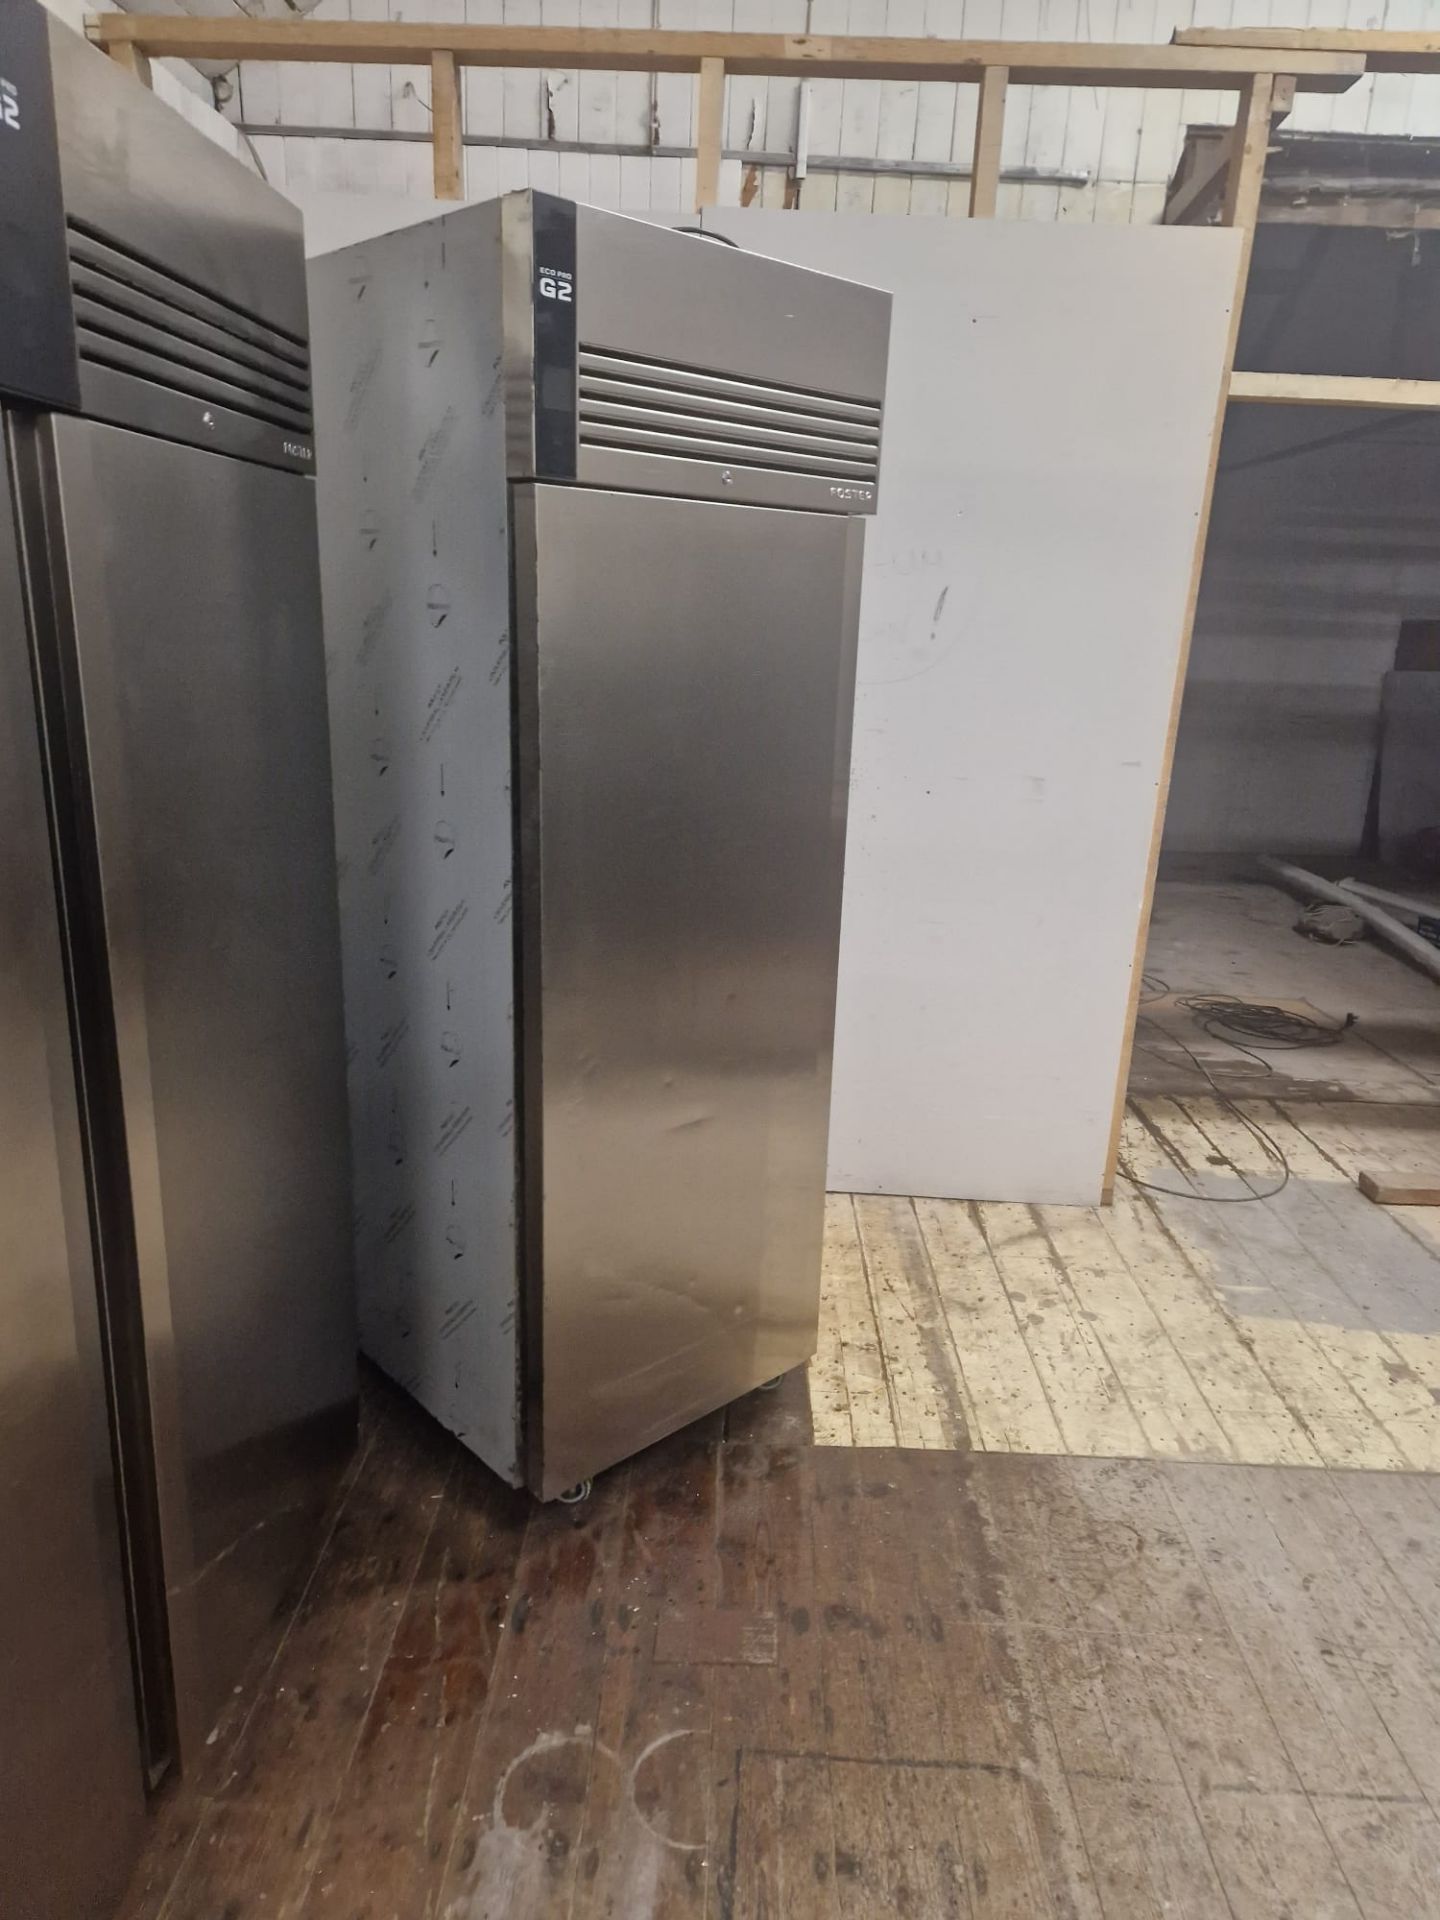 FOSTER G2 UPRIGHT FRIDGE +1 +4 - 600 LITRE STAINLESS STEEL - FULLY WORKING AND SERVICED 